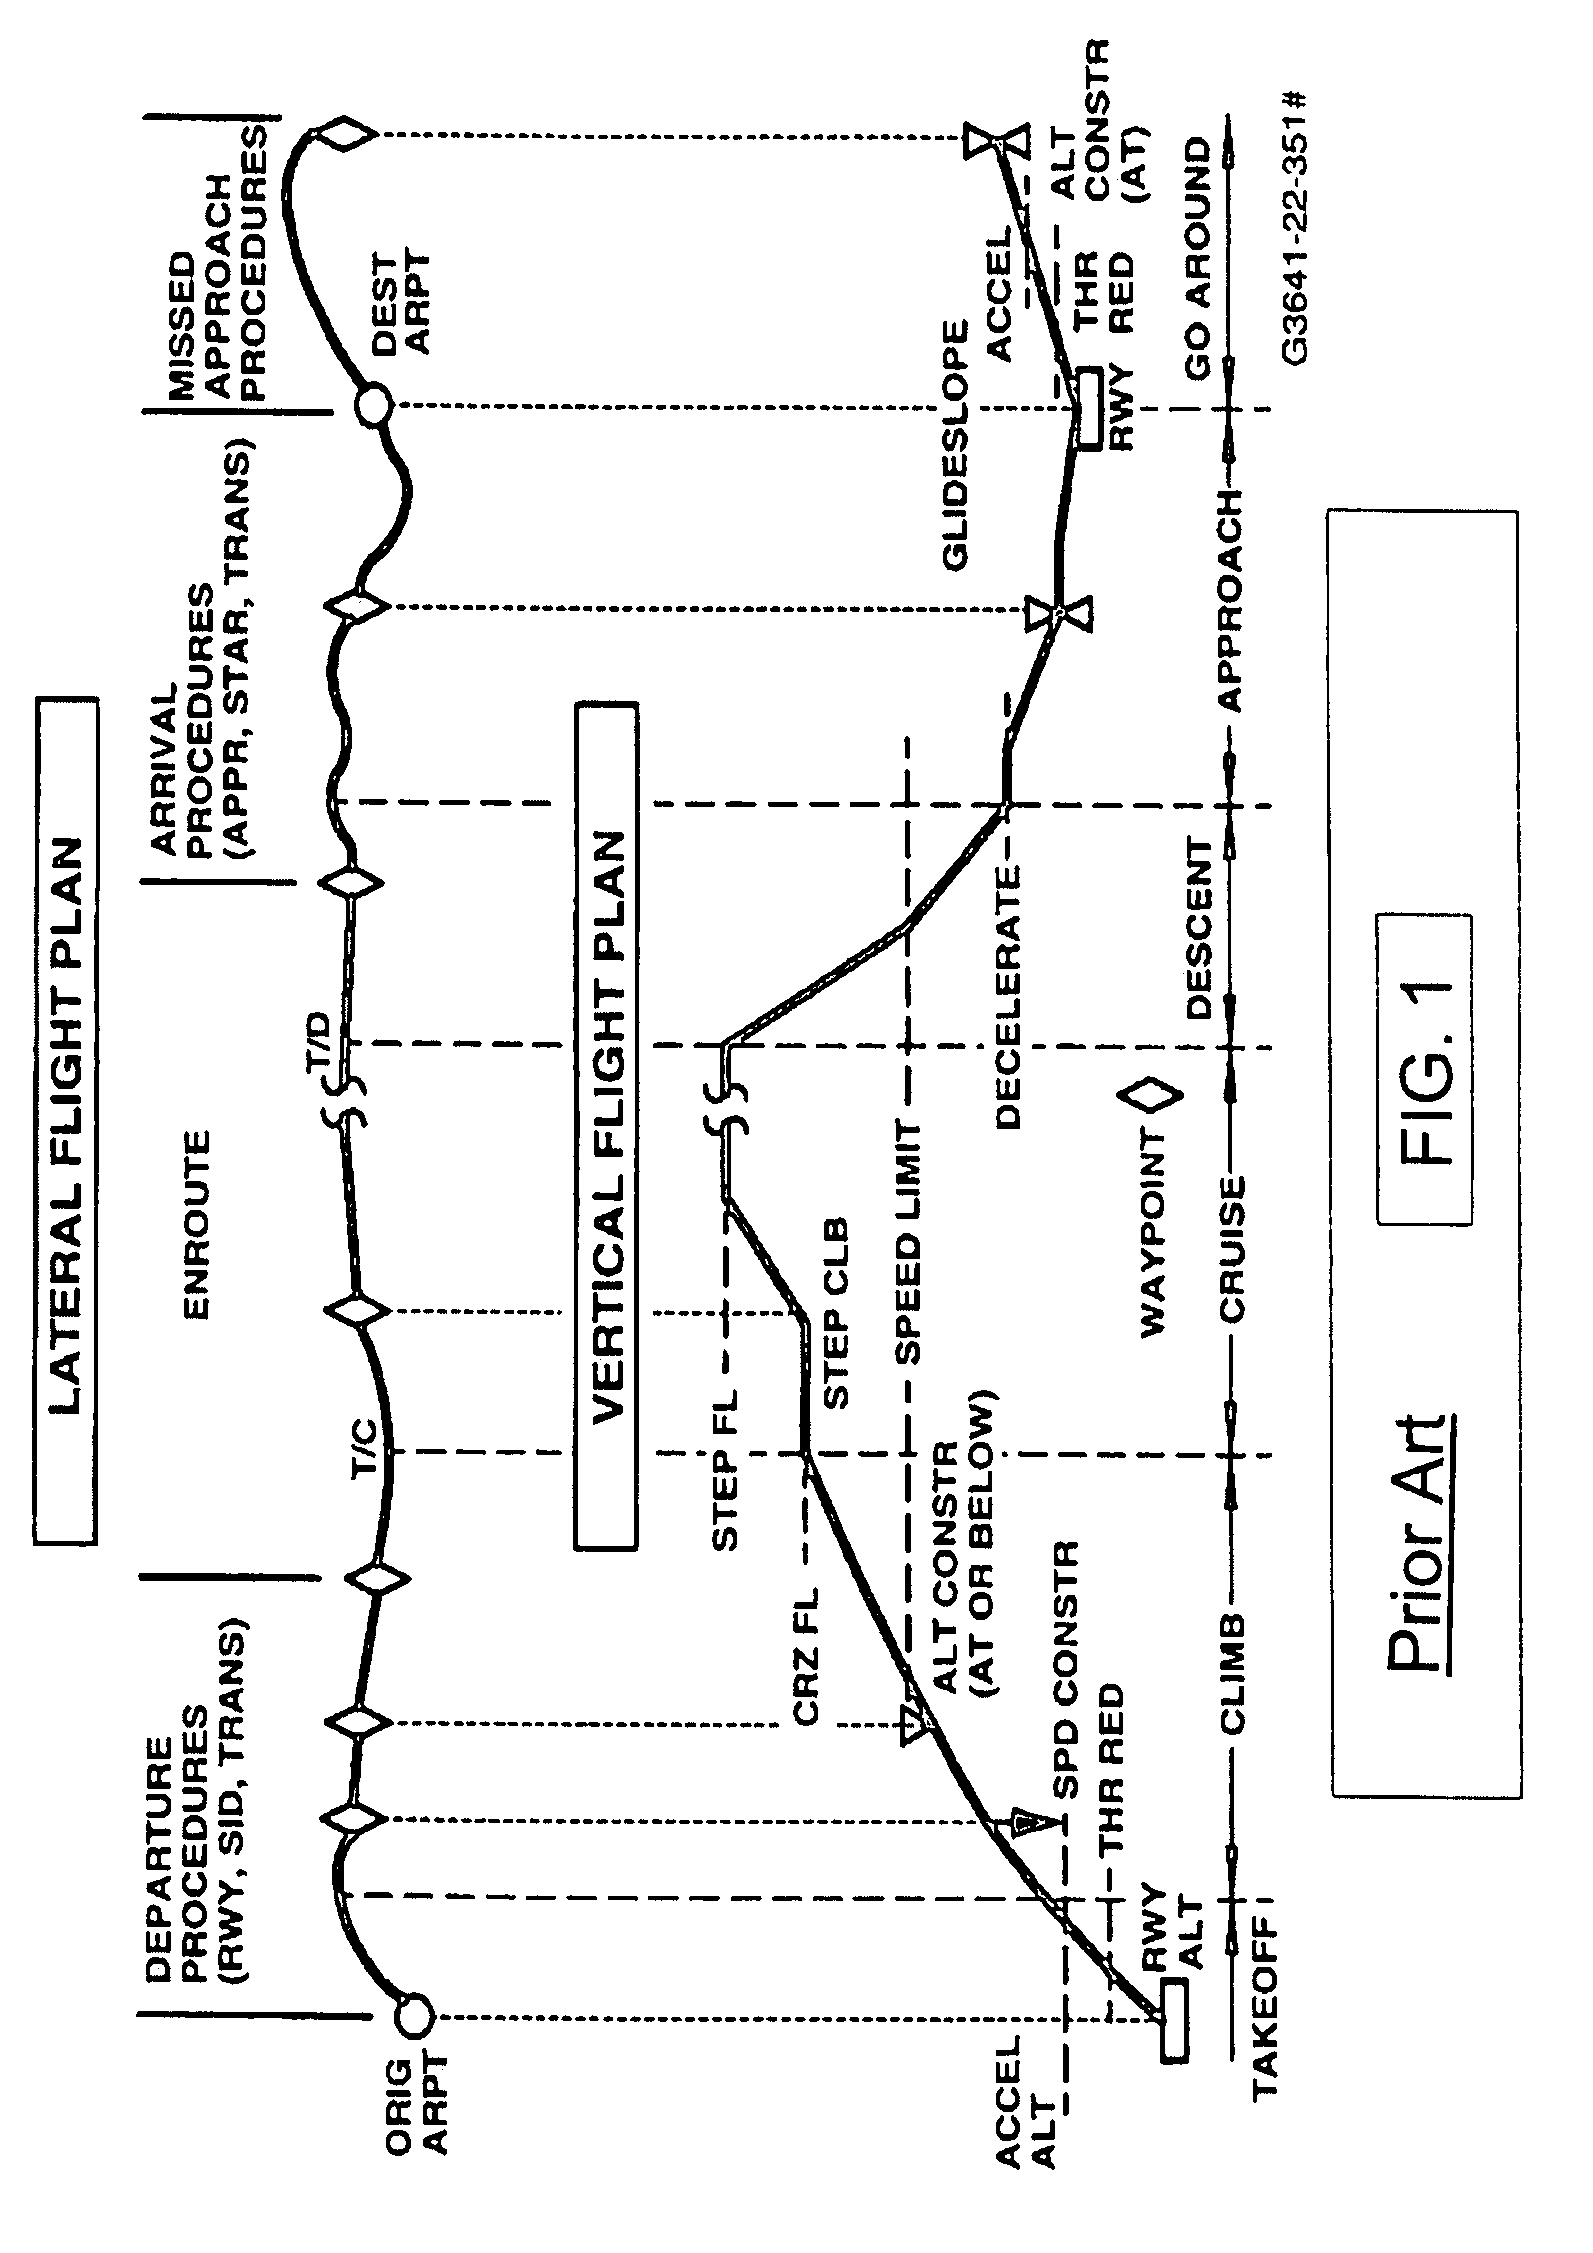 System and method for vertical flight planning